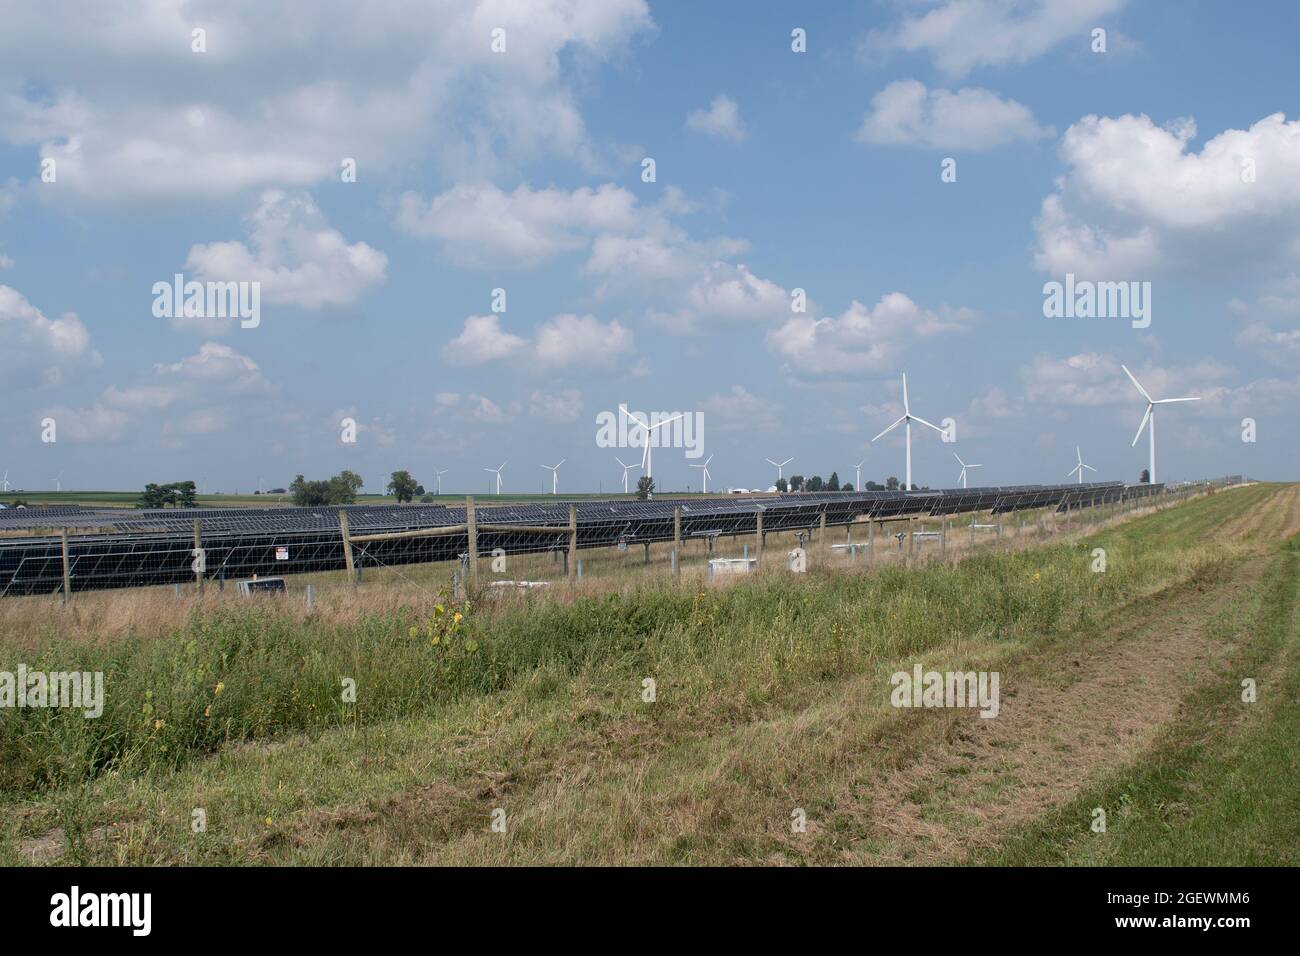 Construction of a solar farm with wind turbines in the background Stock Photo